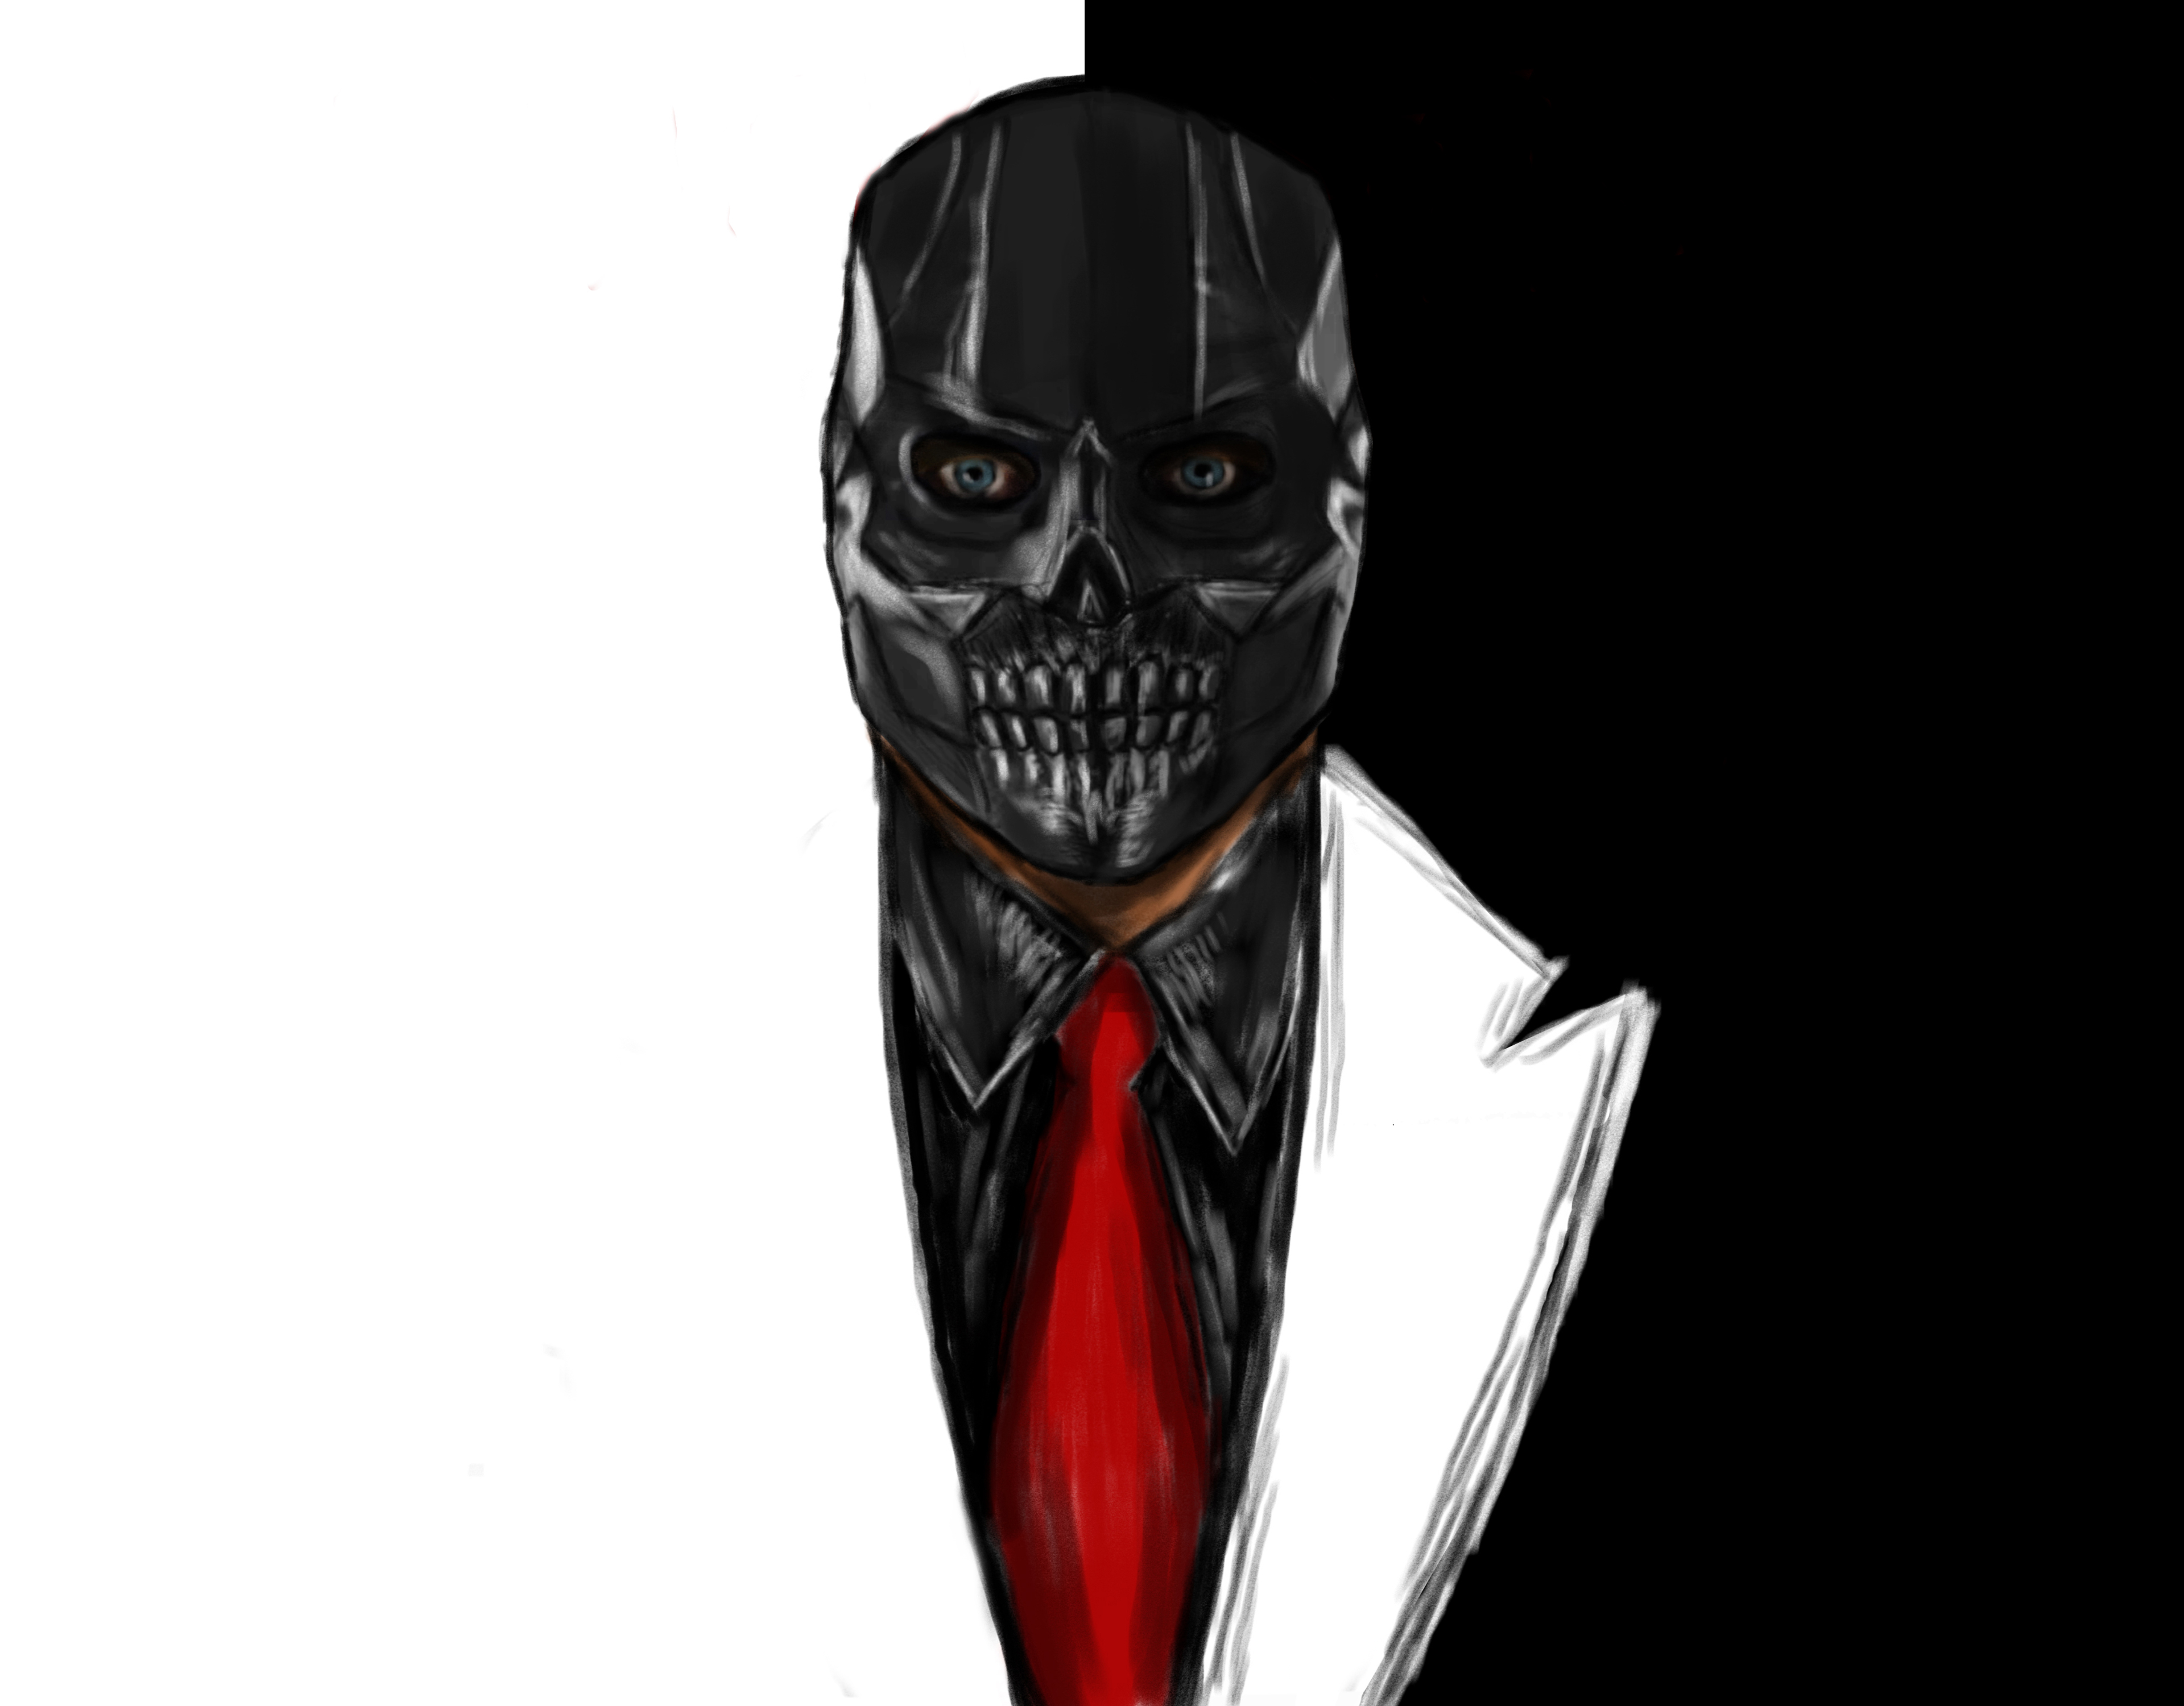 Black Mask Art Wallpaper, Hd Movies 4K Wallpapers, Images, Photos And